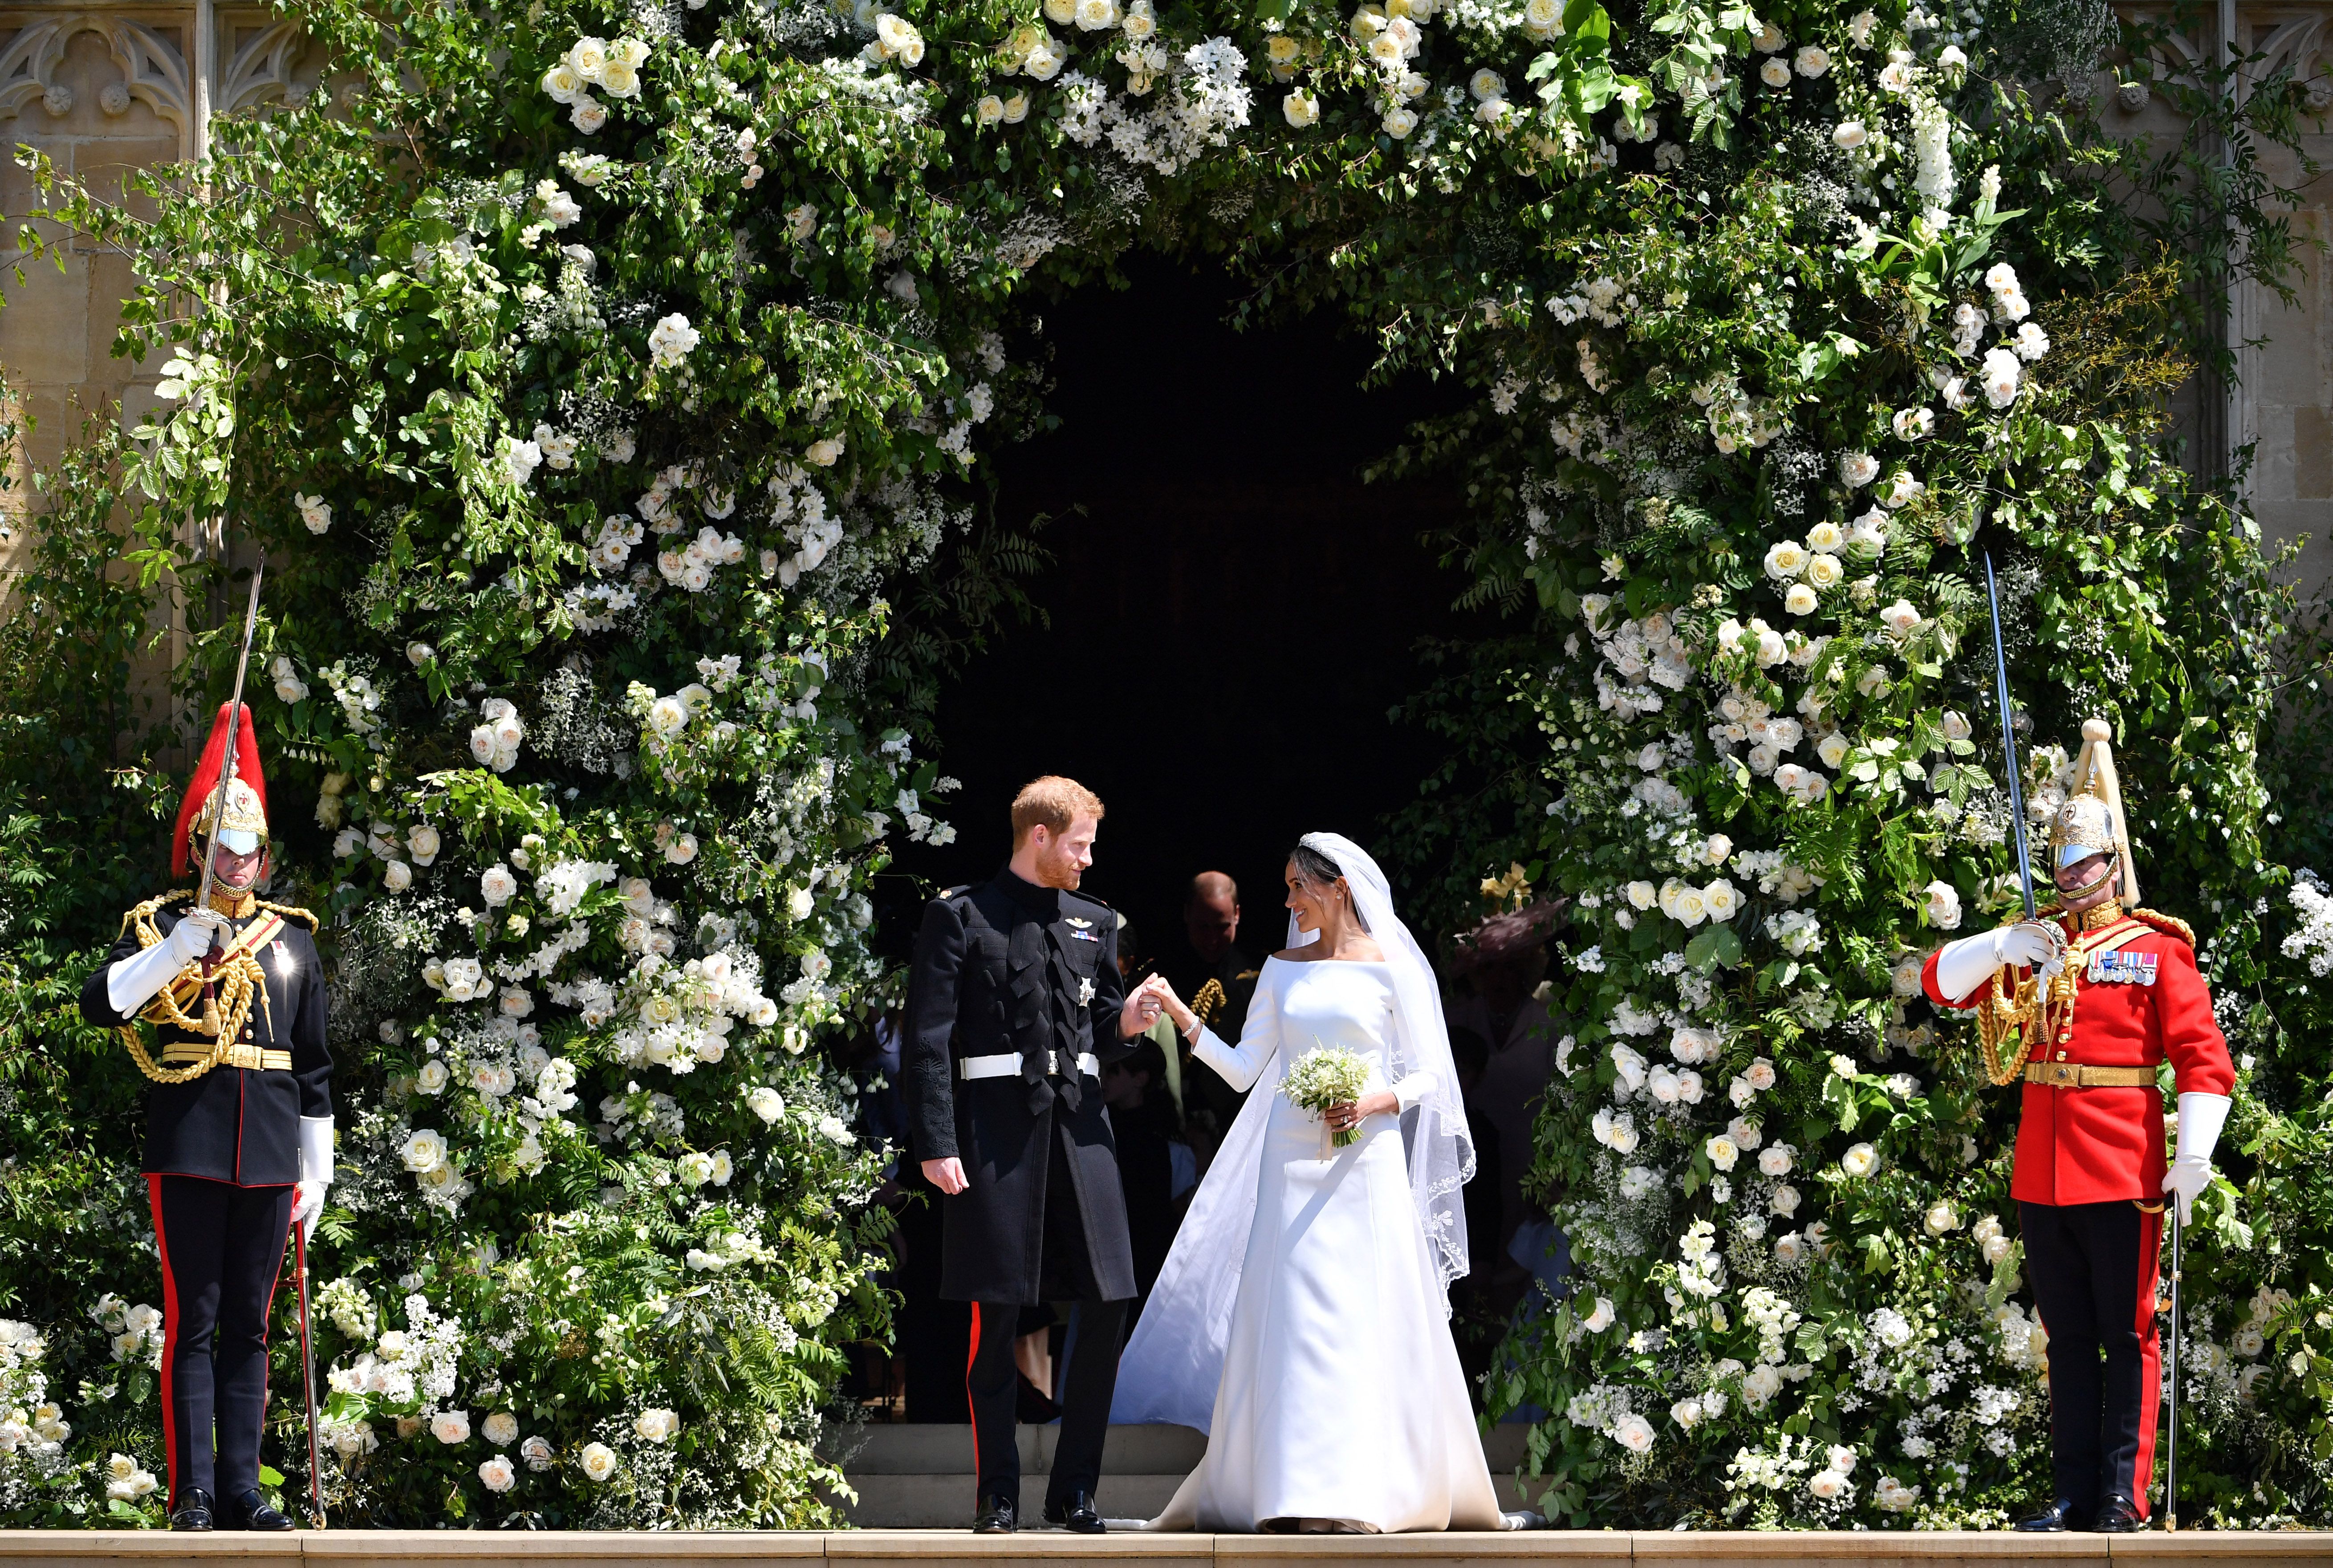 The royal wedding may cost $43 million and 94% of that is for security